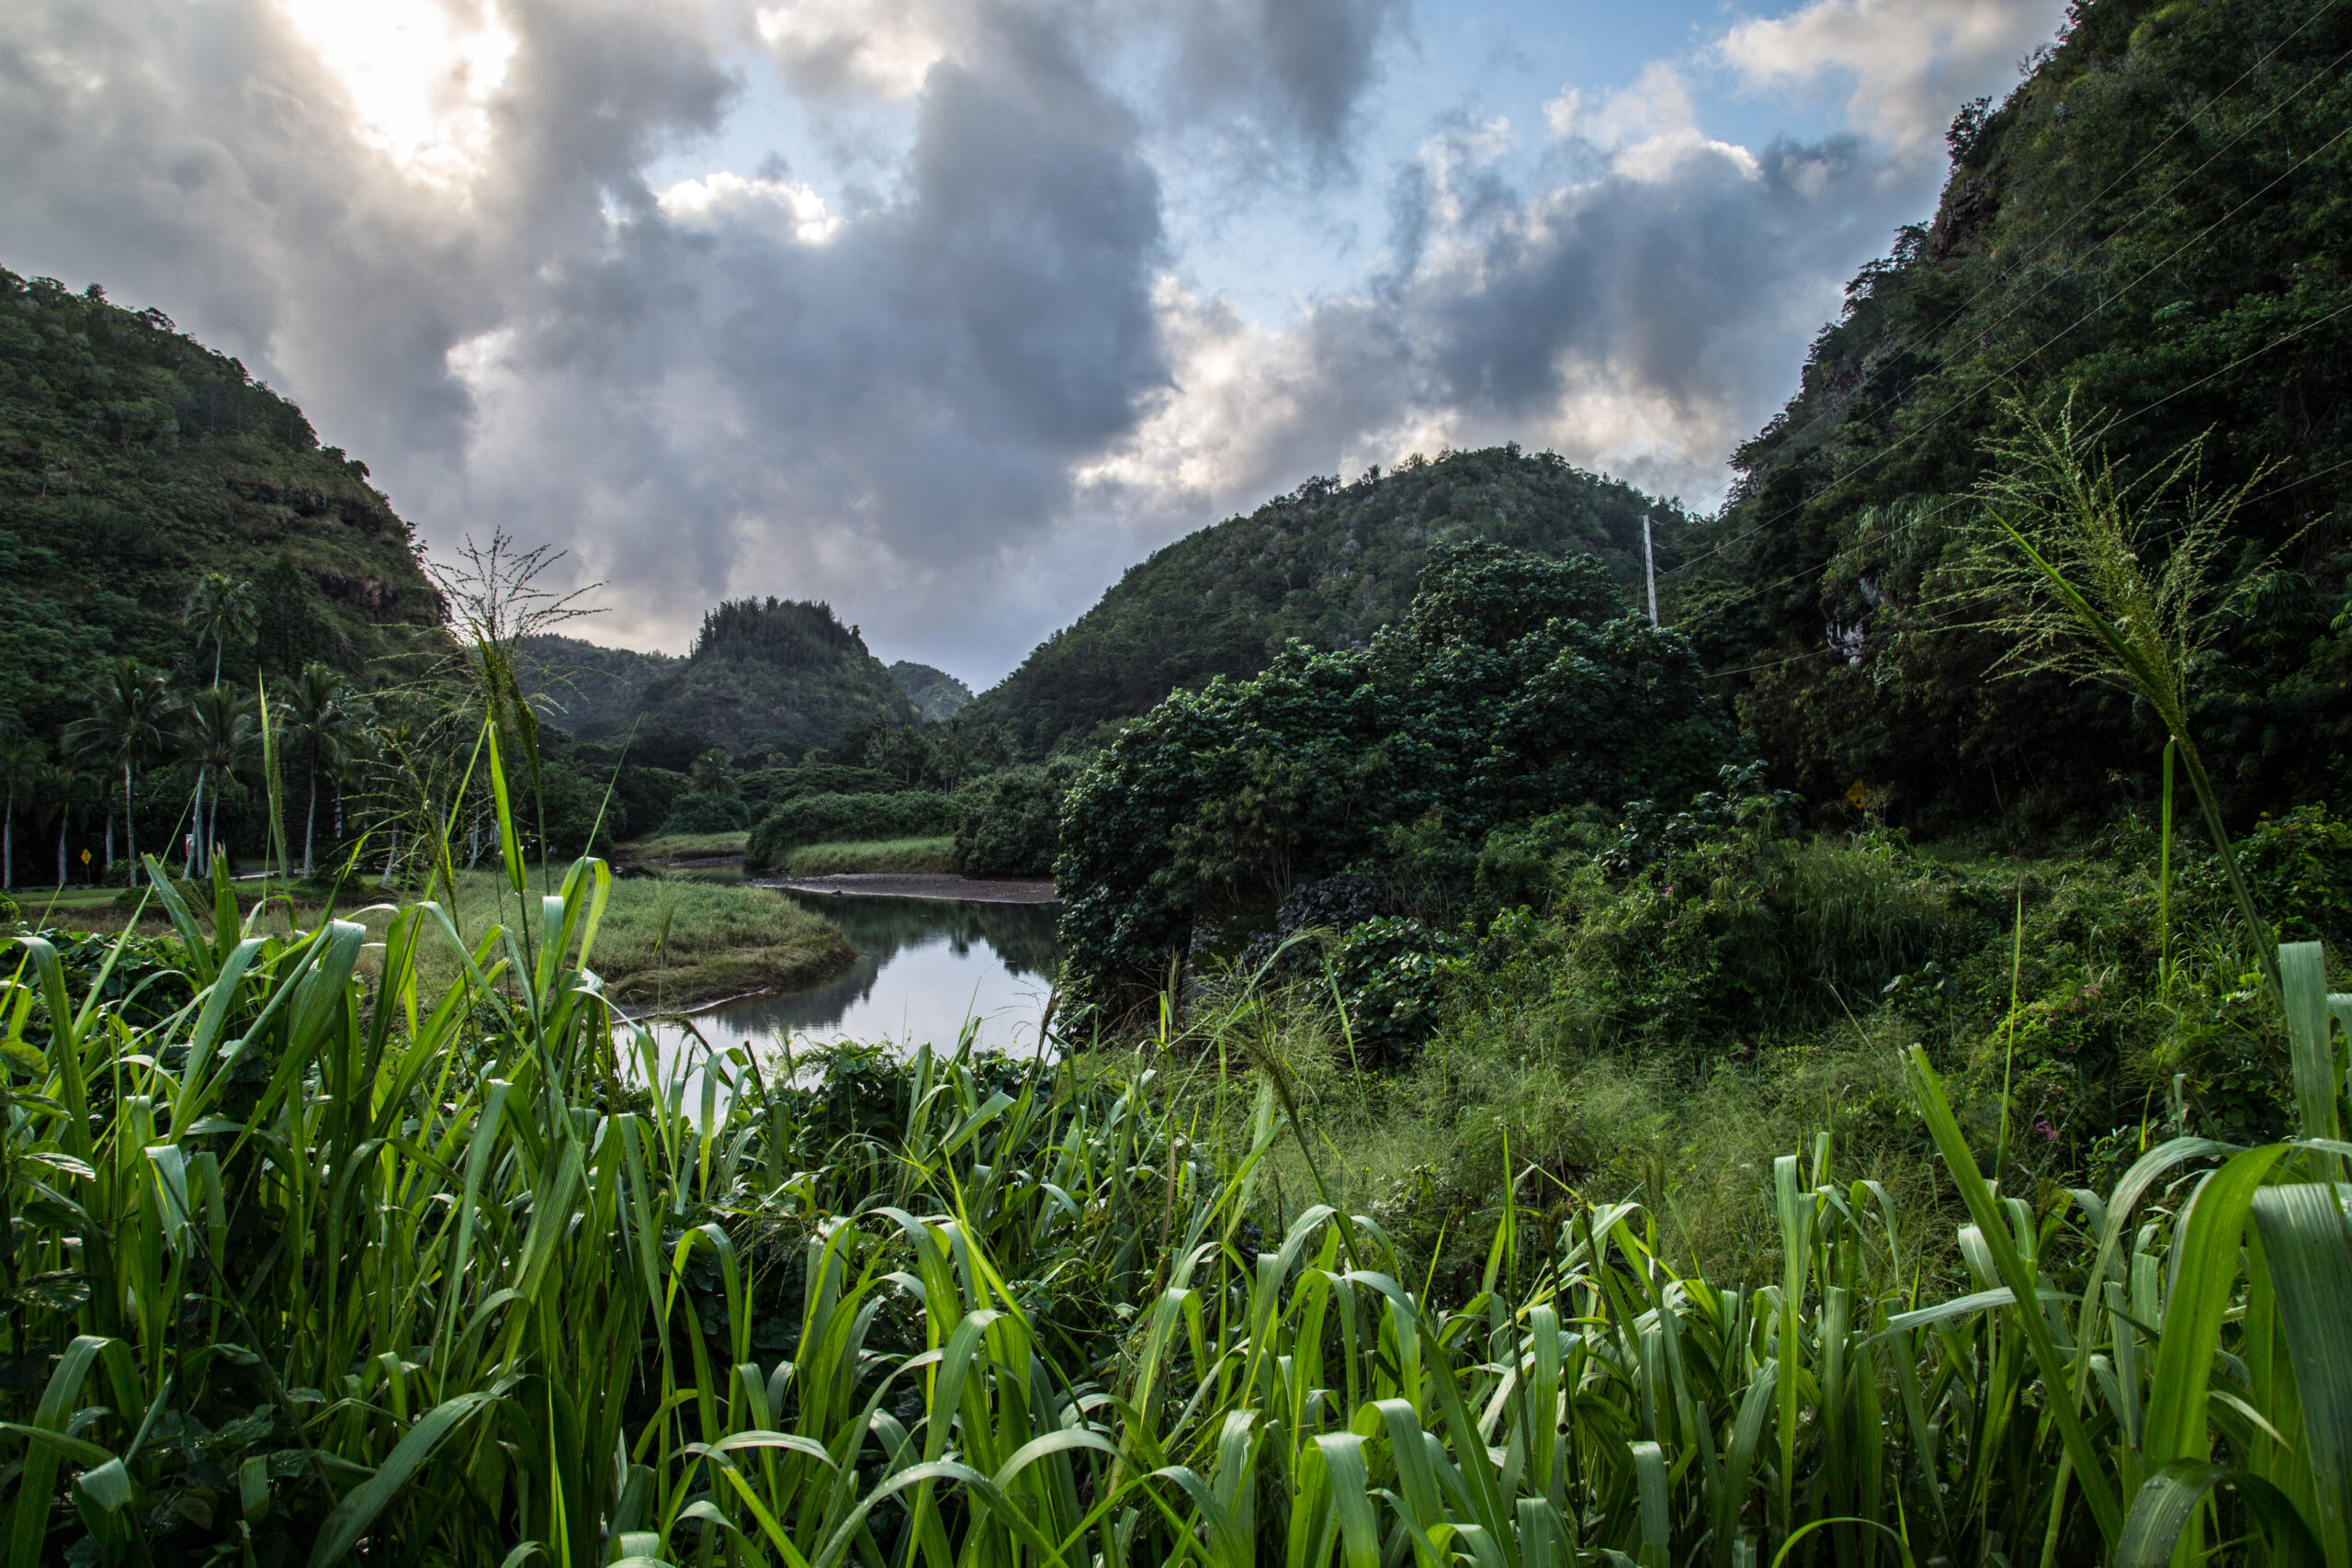 View of the Waimea Valley.